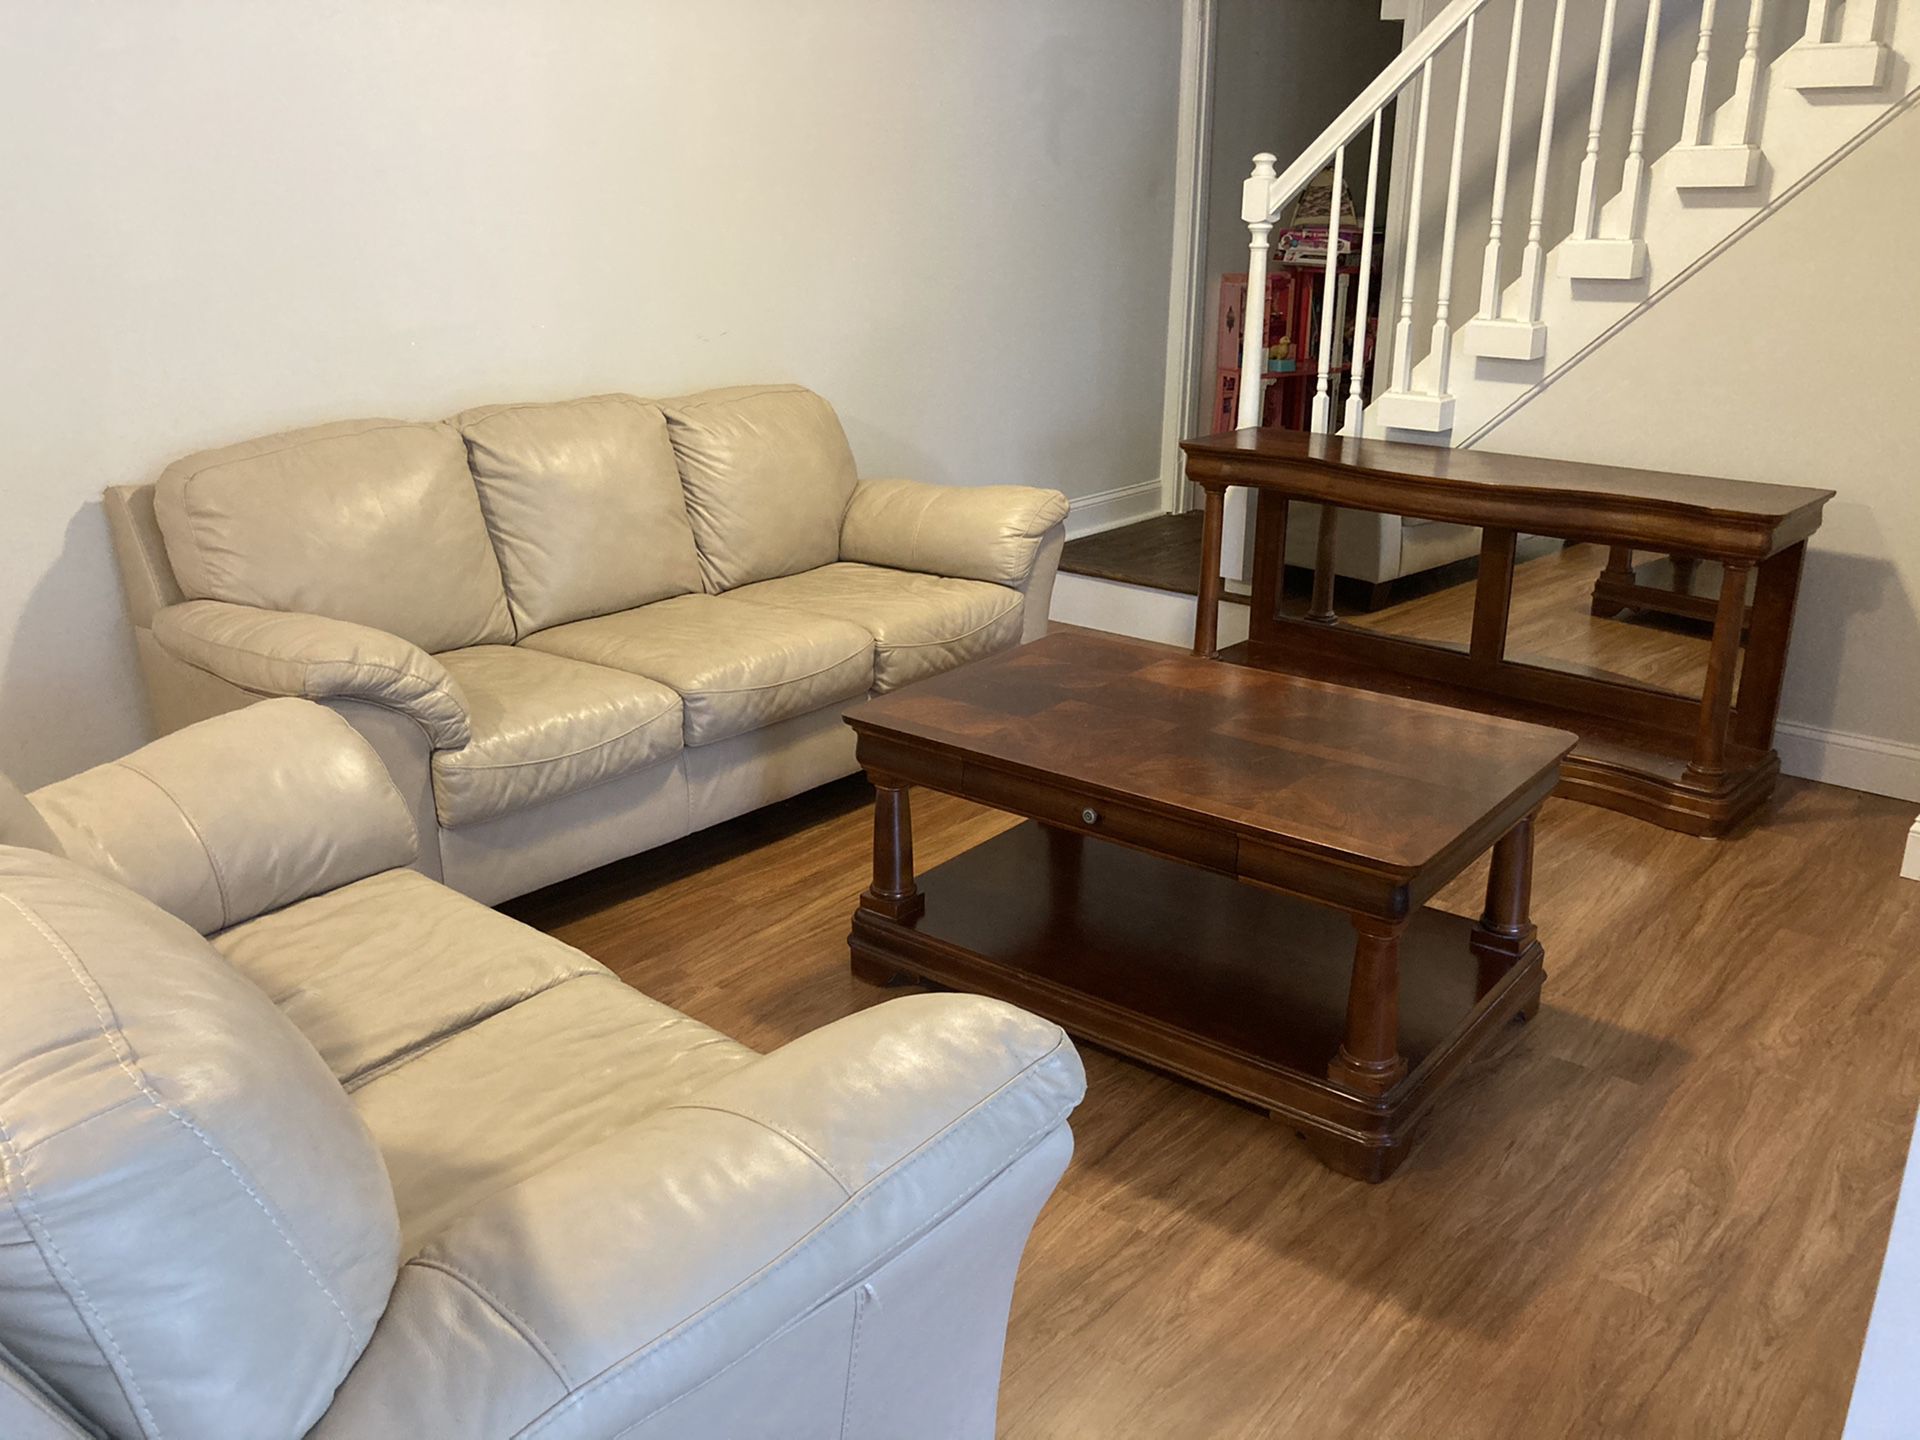 Leaving room set: Ashely Sofa, loveseat, Coffee table, and TV stand